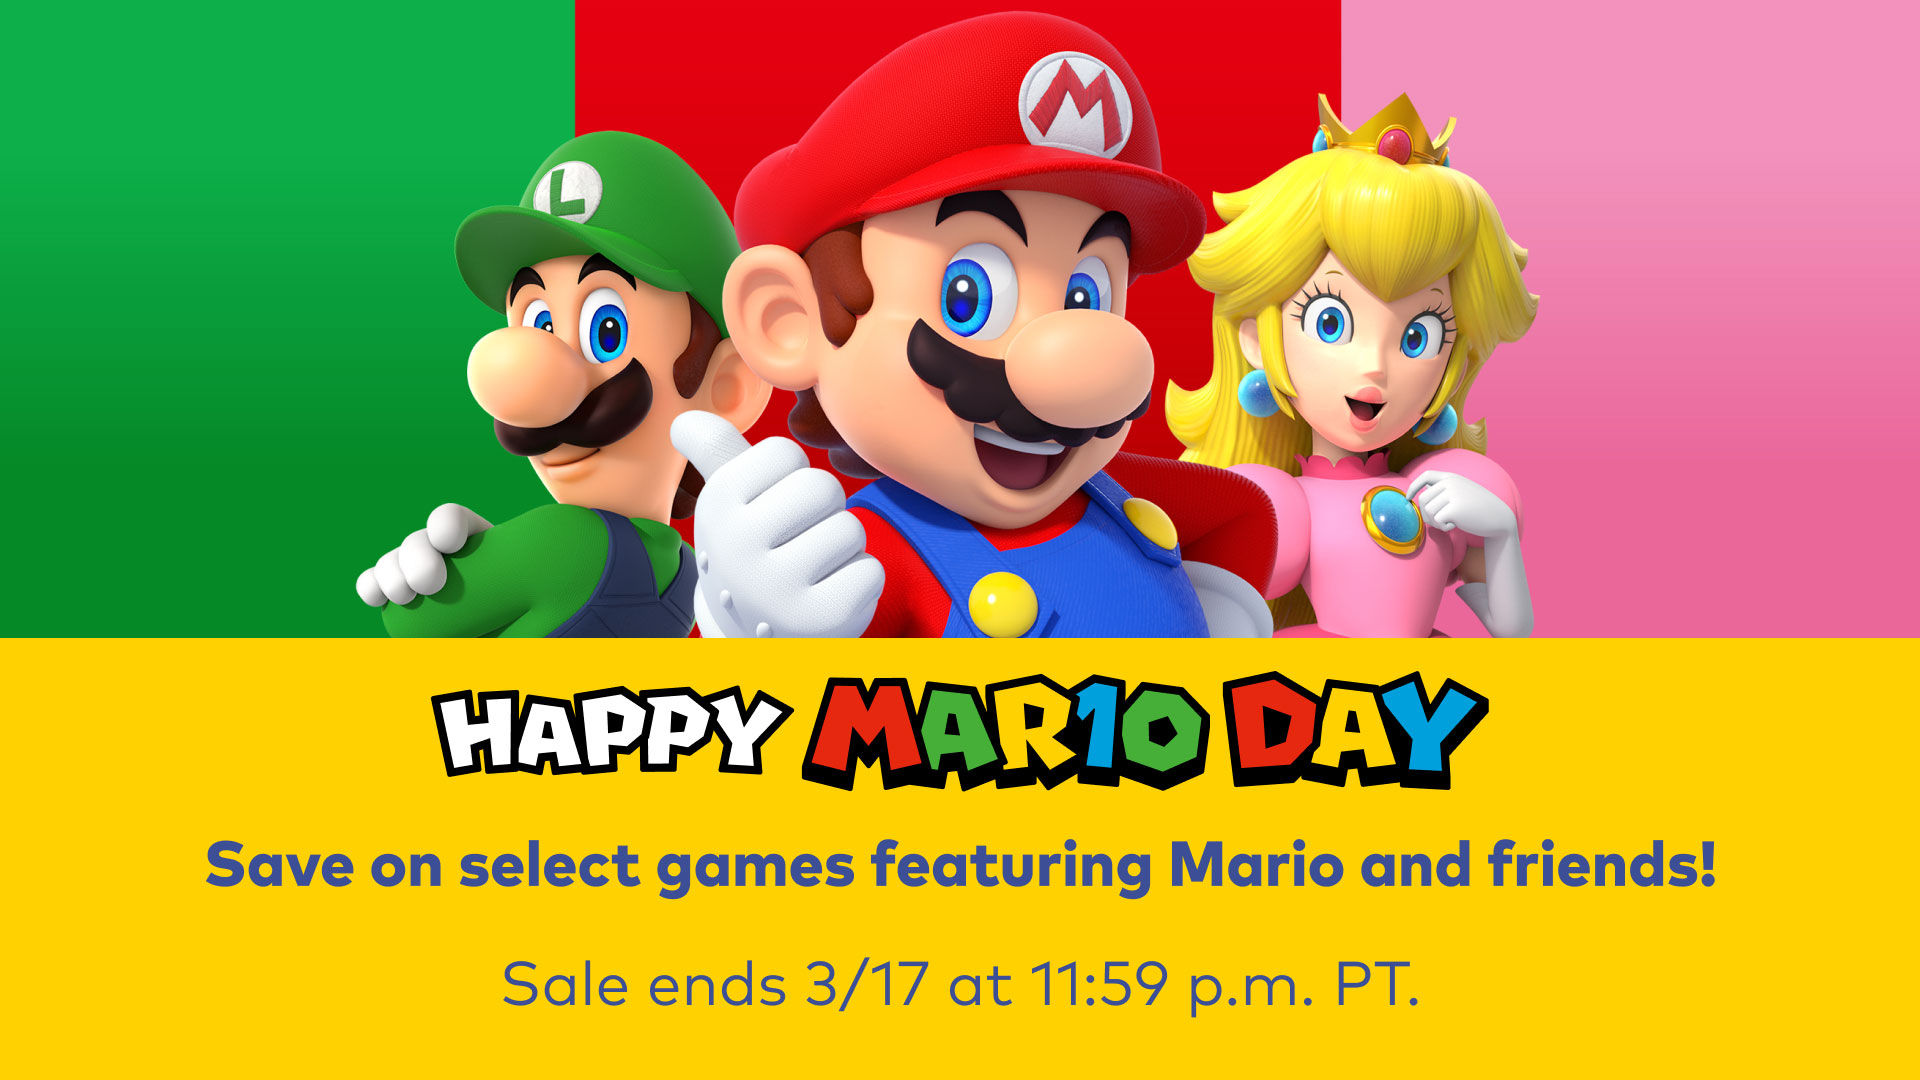 Celebrate MAR10 Day by saving on popular Nintendo Switch games and accessories